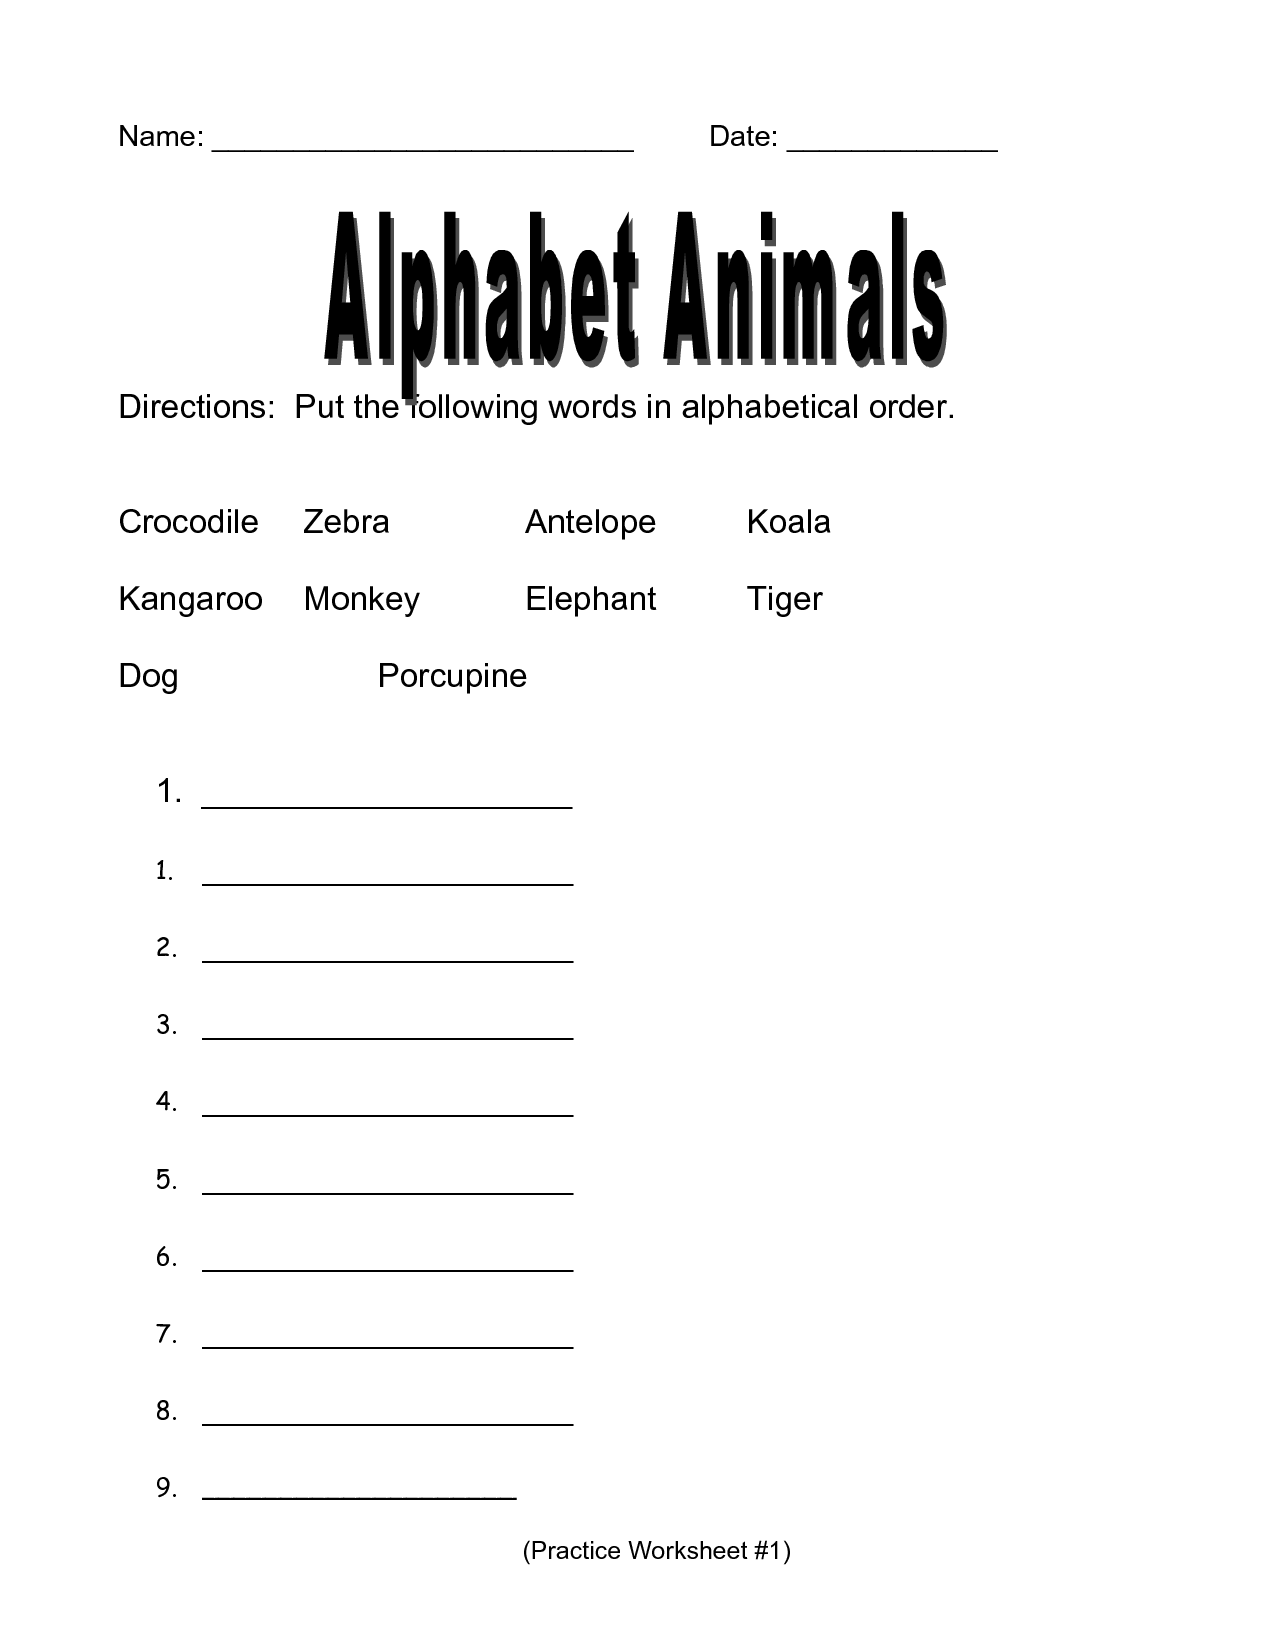 11-best-images-of-vocabulary-word-and-definition-worksheet-frayer-model-vocabulary-template